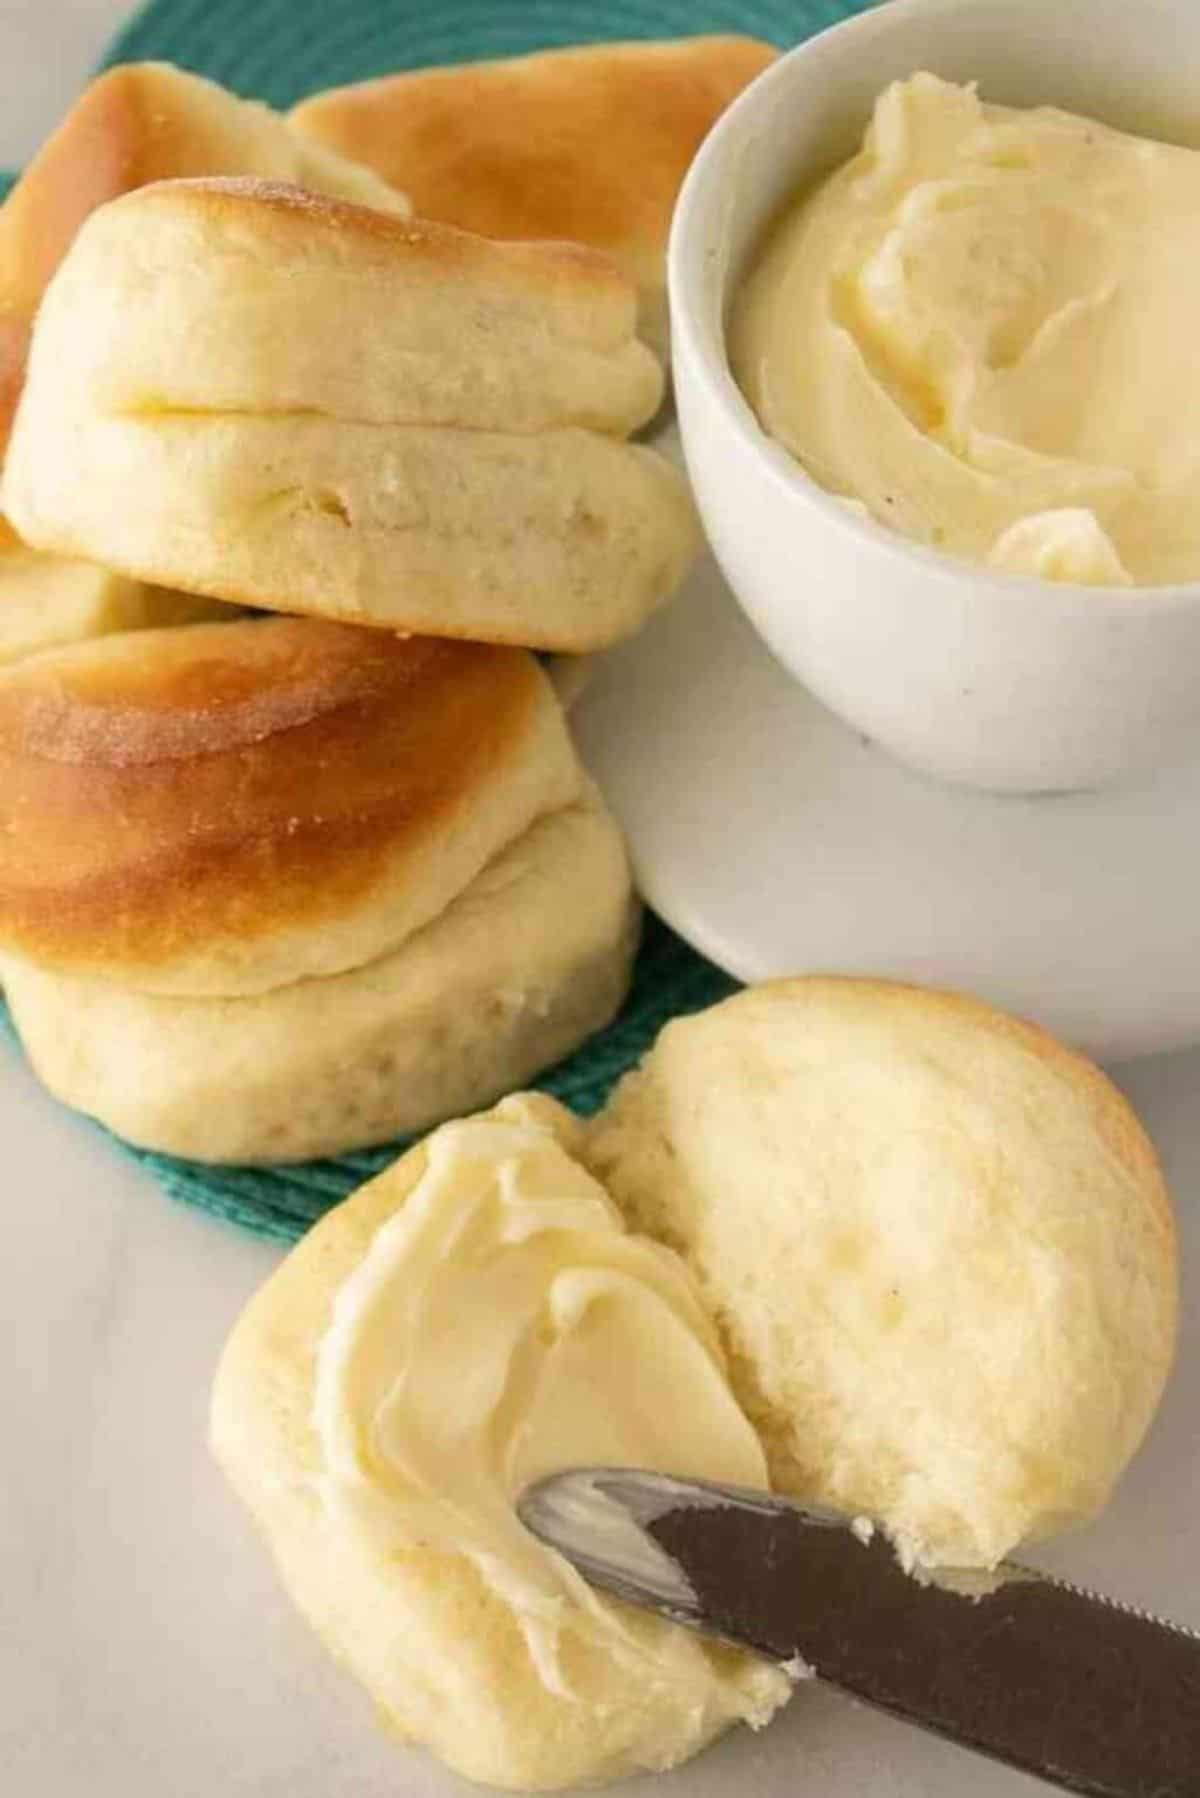 Parker House Rolls spread with butter.